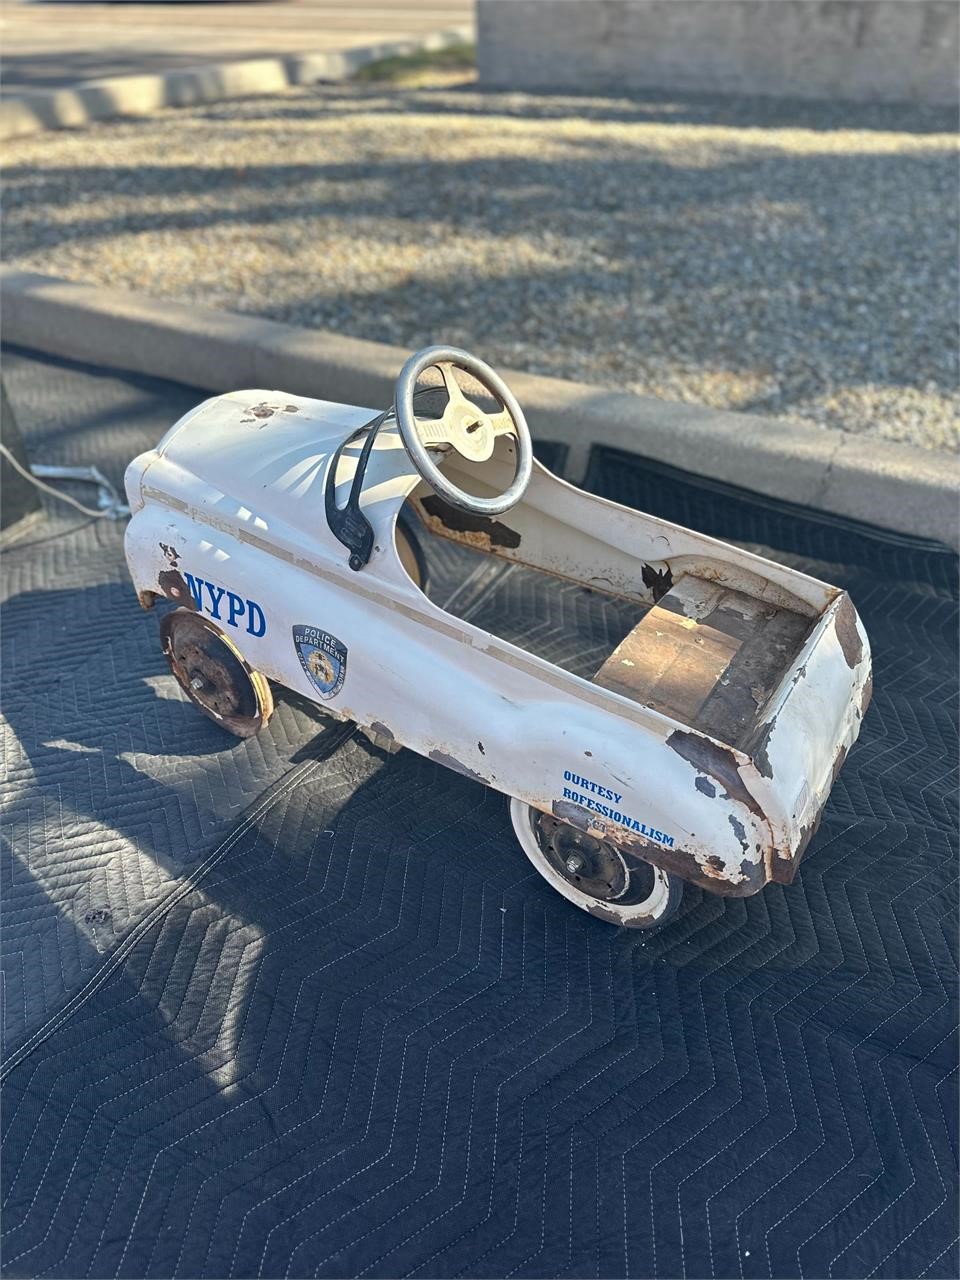 NYPD Vintage Toy Car